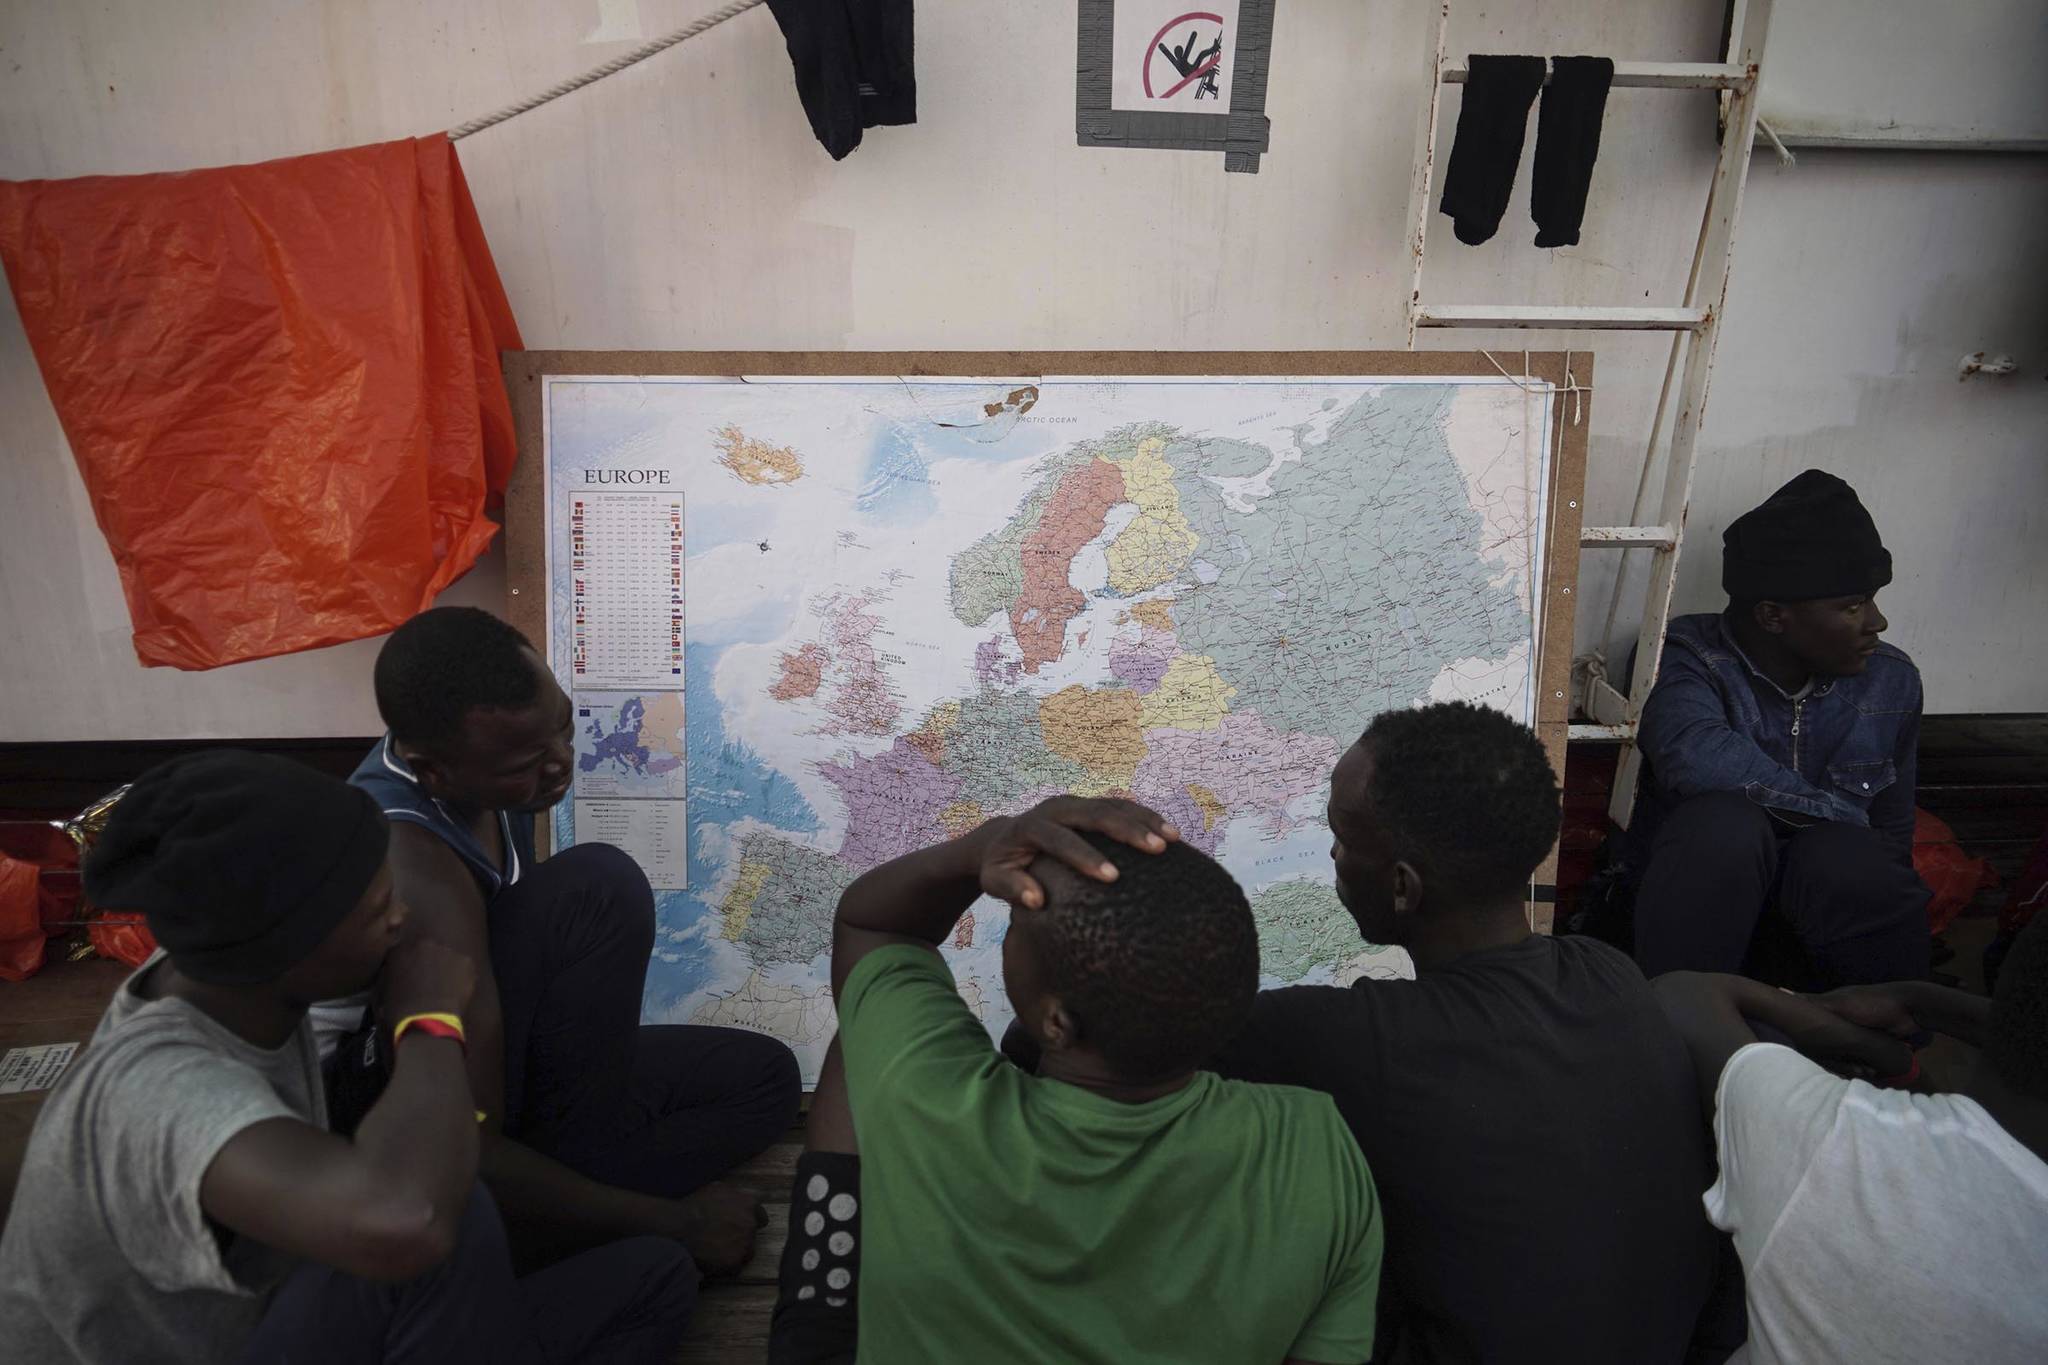 In this Sept. 23 photo, rescued migrants look at a map of Europe aboard the Ocean Viking humanitarian ship as it sails in the Mediterranean Sea. (AP Photo | Renata Brito)